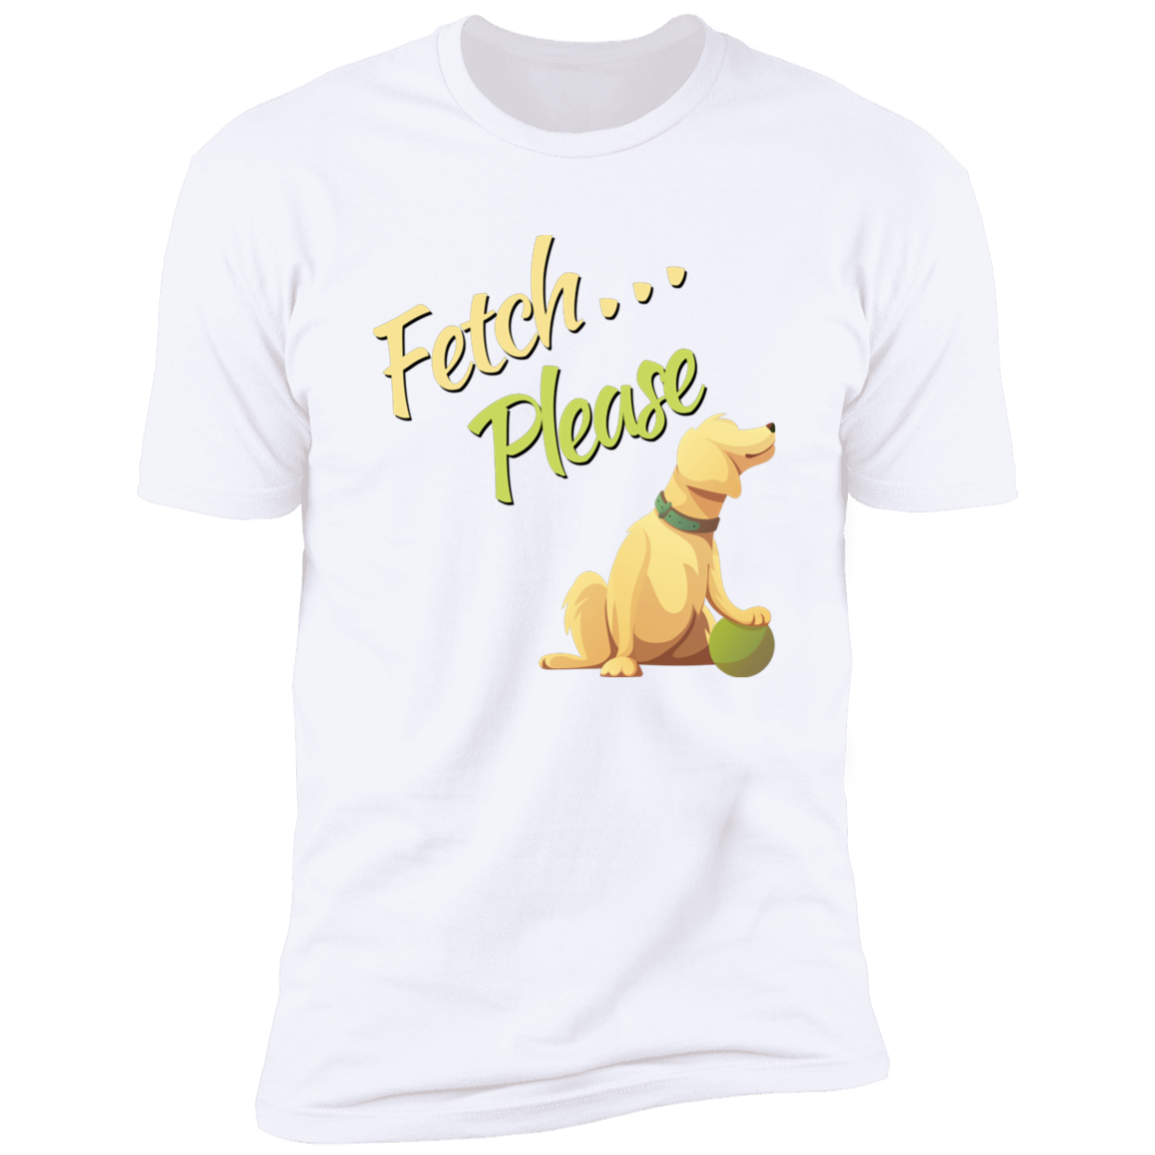 Fetch Please funny dog t-shirt, funny dog shirt for humans, in white